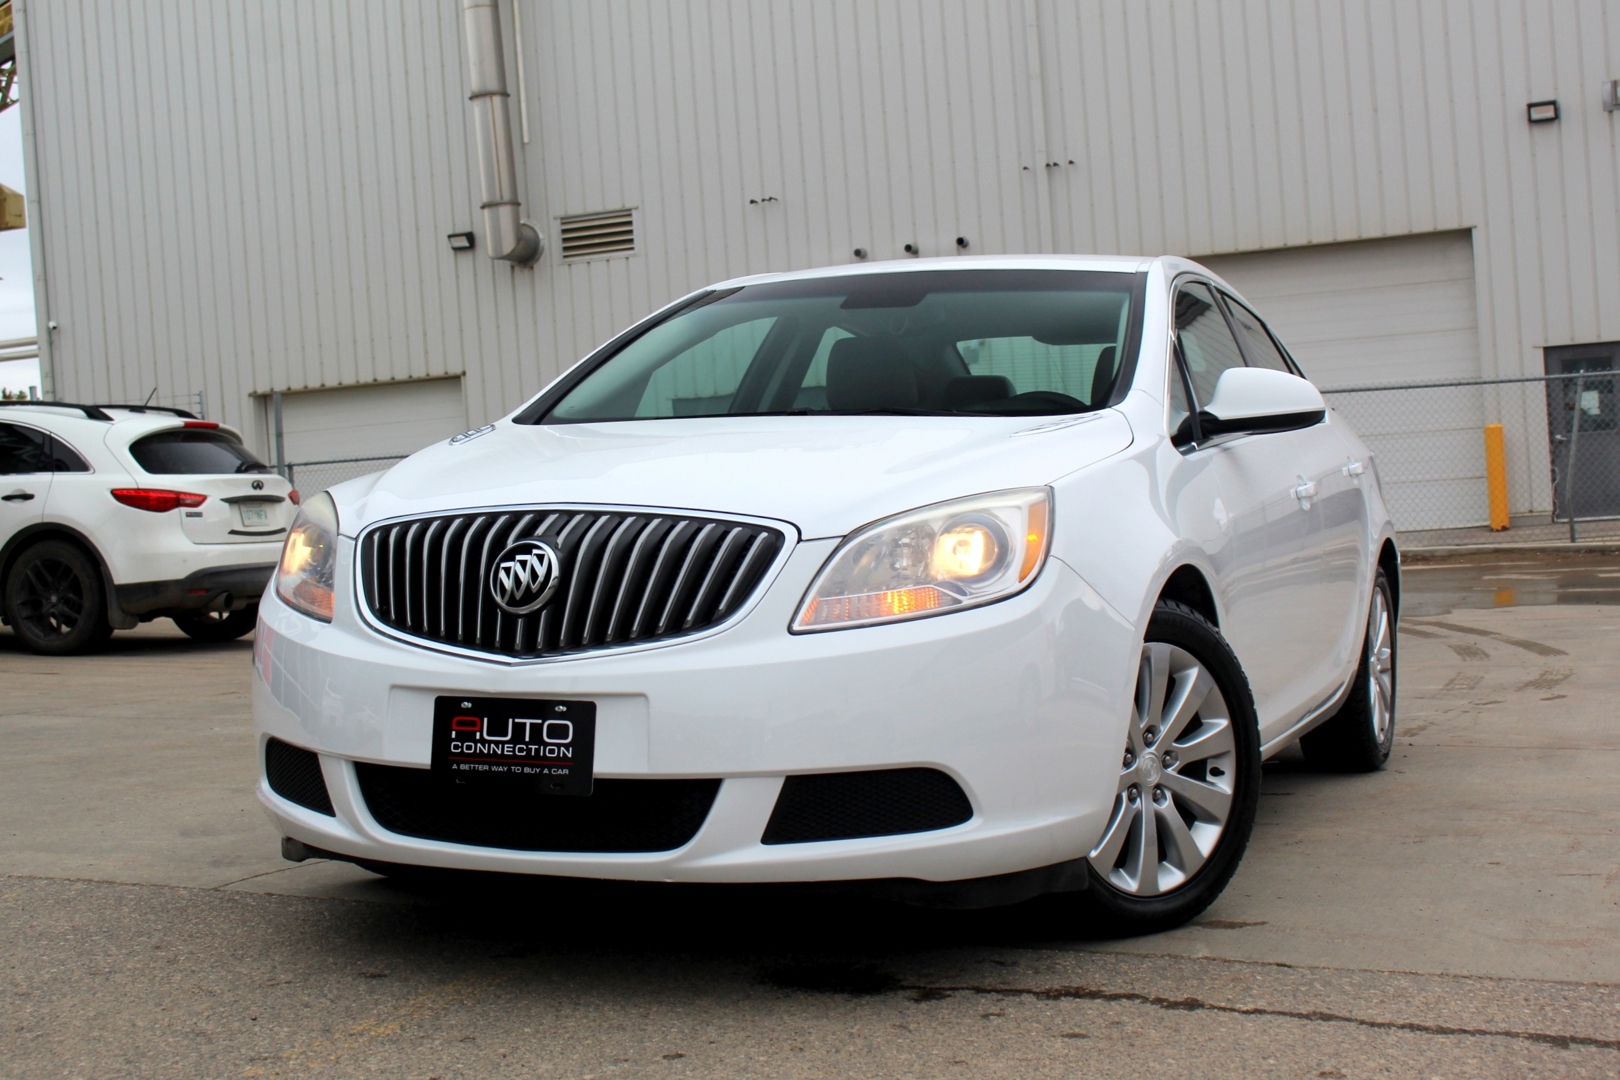 2017 Buick Verano - LOW KMS - EXCEPTIONAL CONDITION